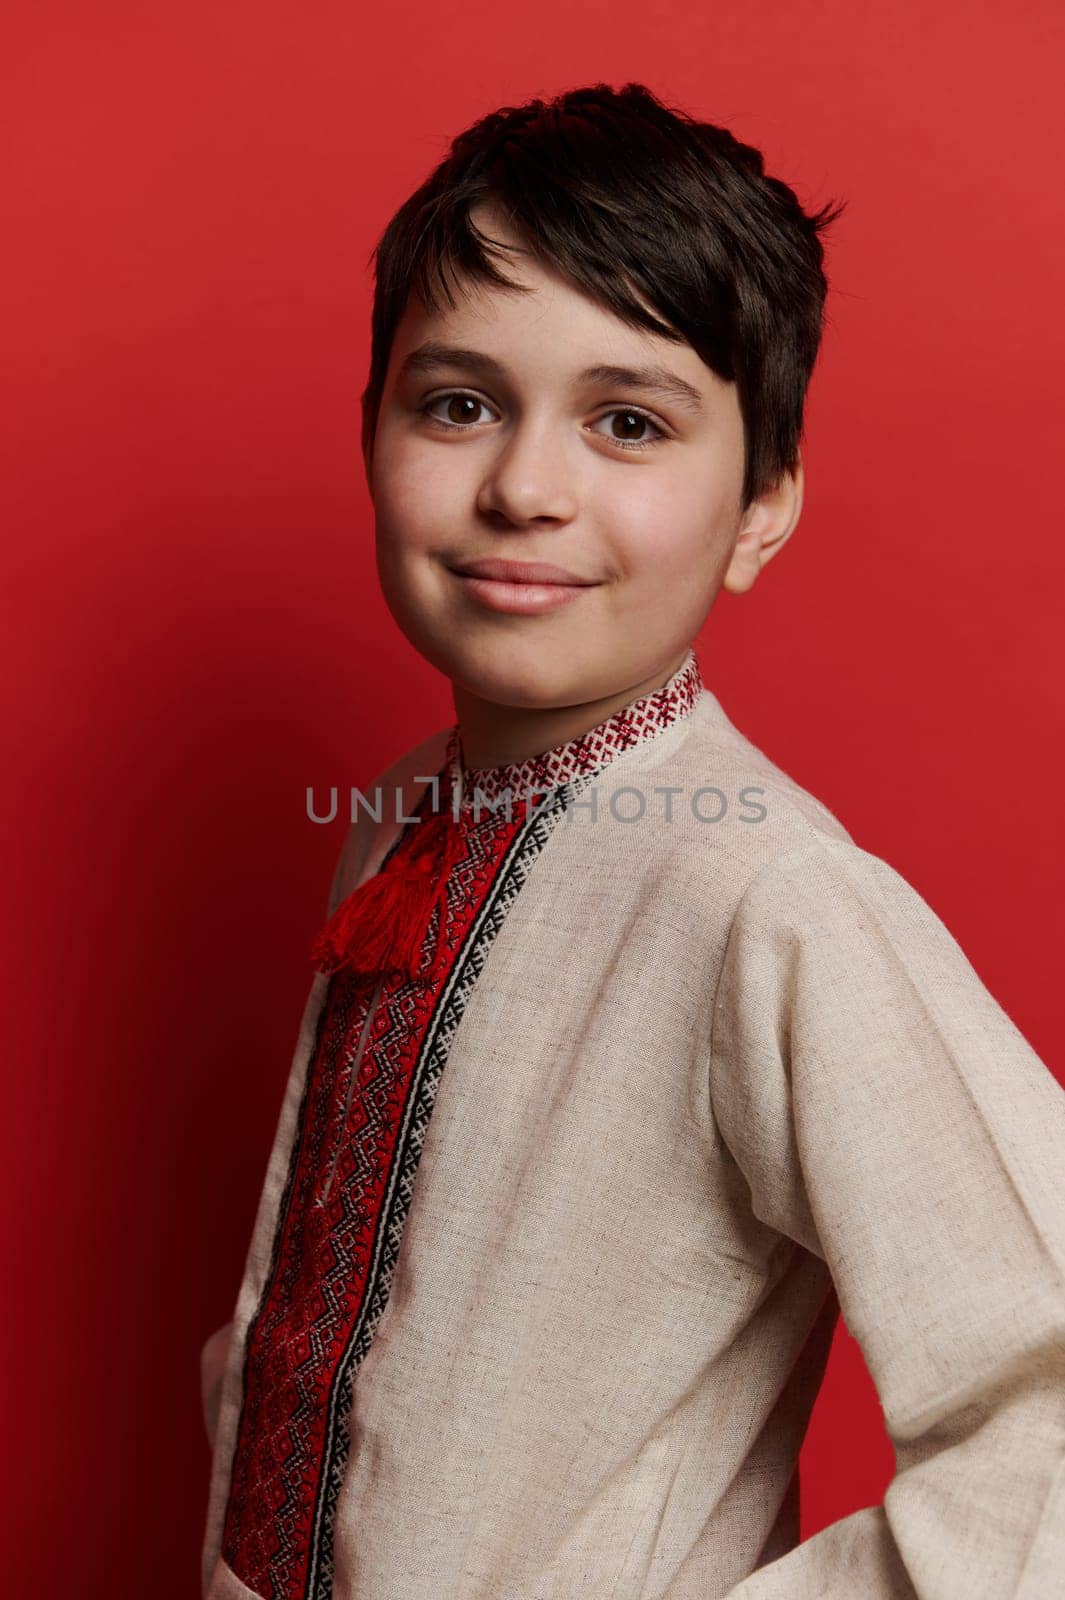 Handsome Caucasian teenage boy dressed in traditional Ukrainian embroidered linen shirt, smiling looking at camera, isolated red background. Ukrainian ethnic clothing. Fashion People Culture Folklore